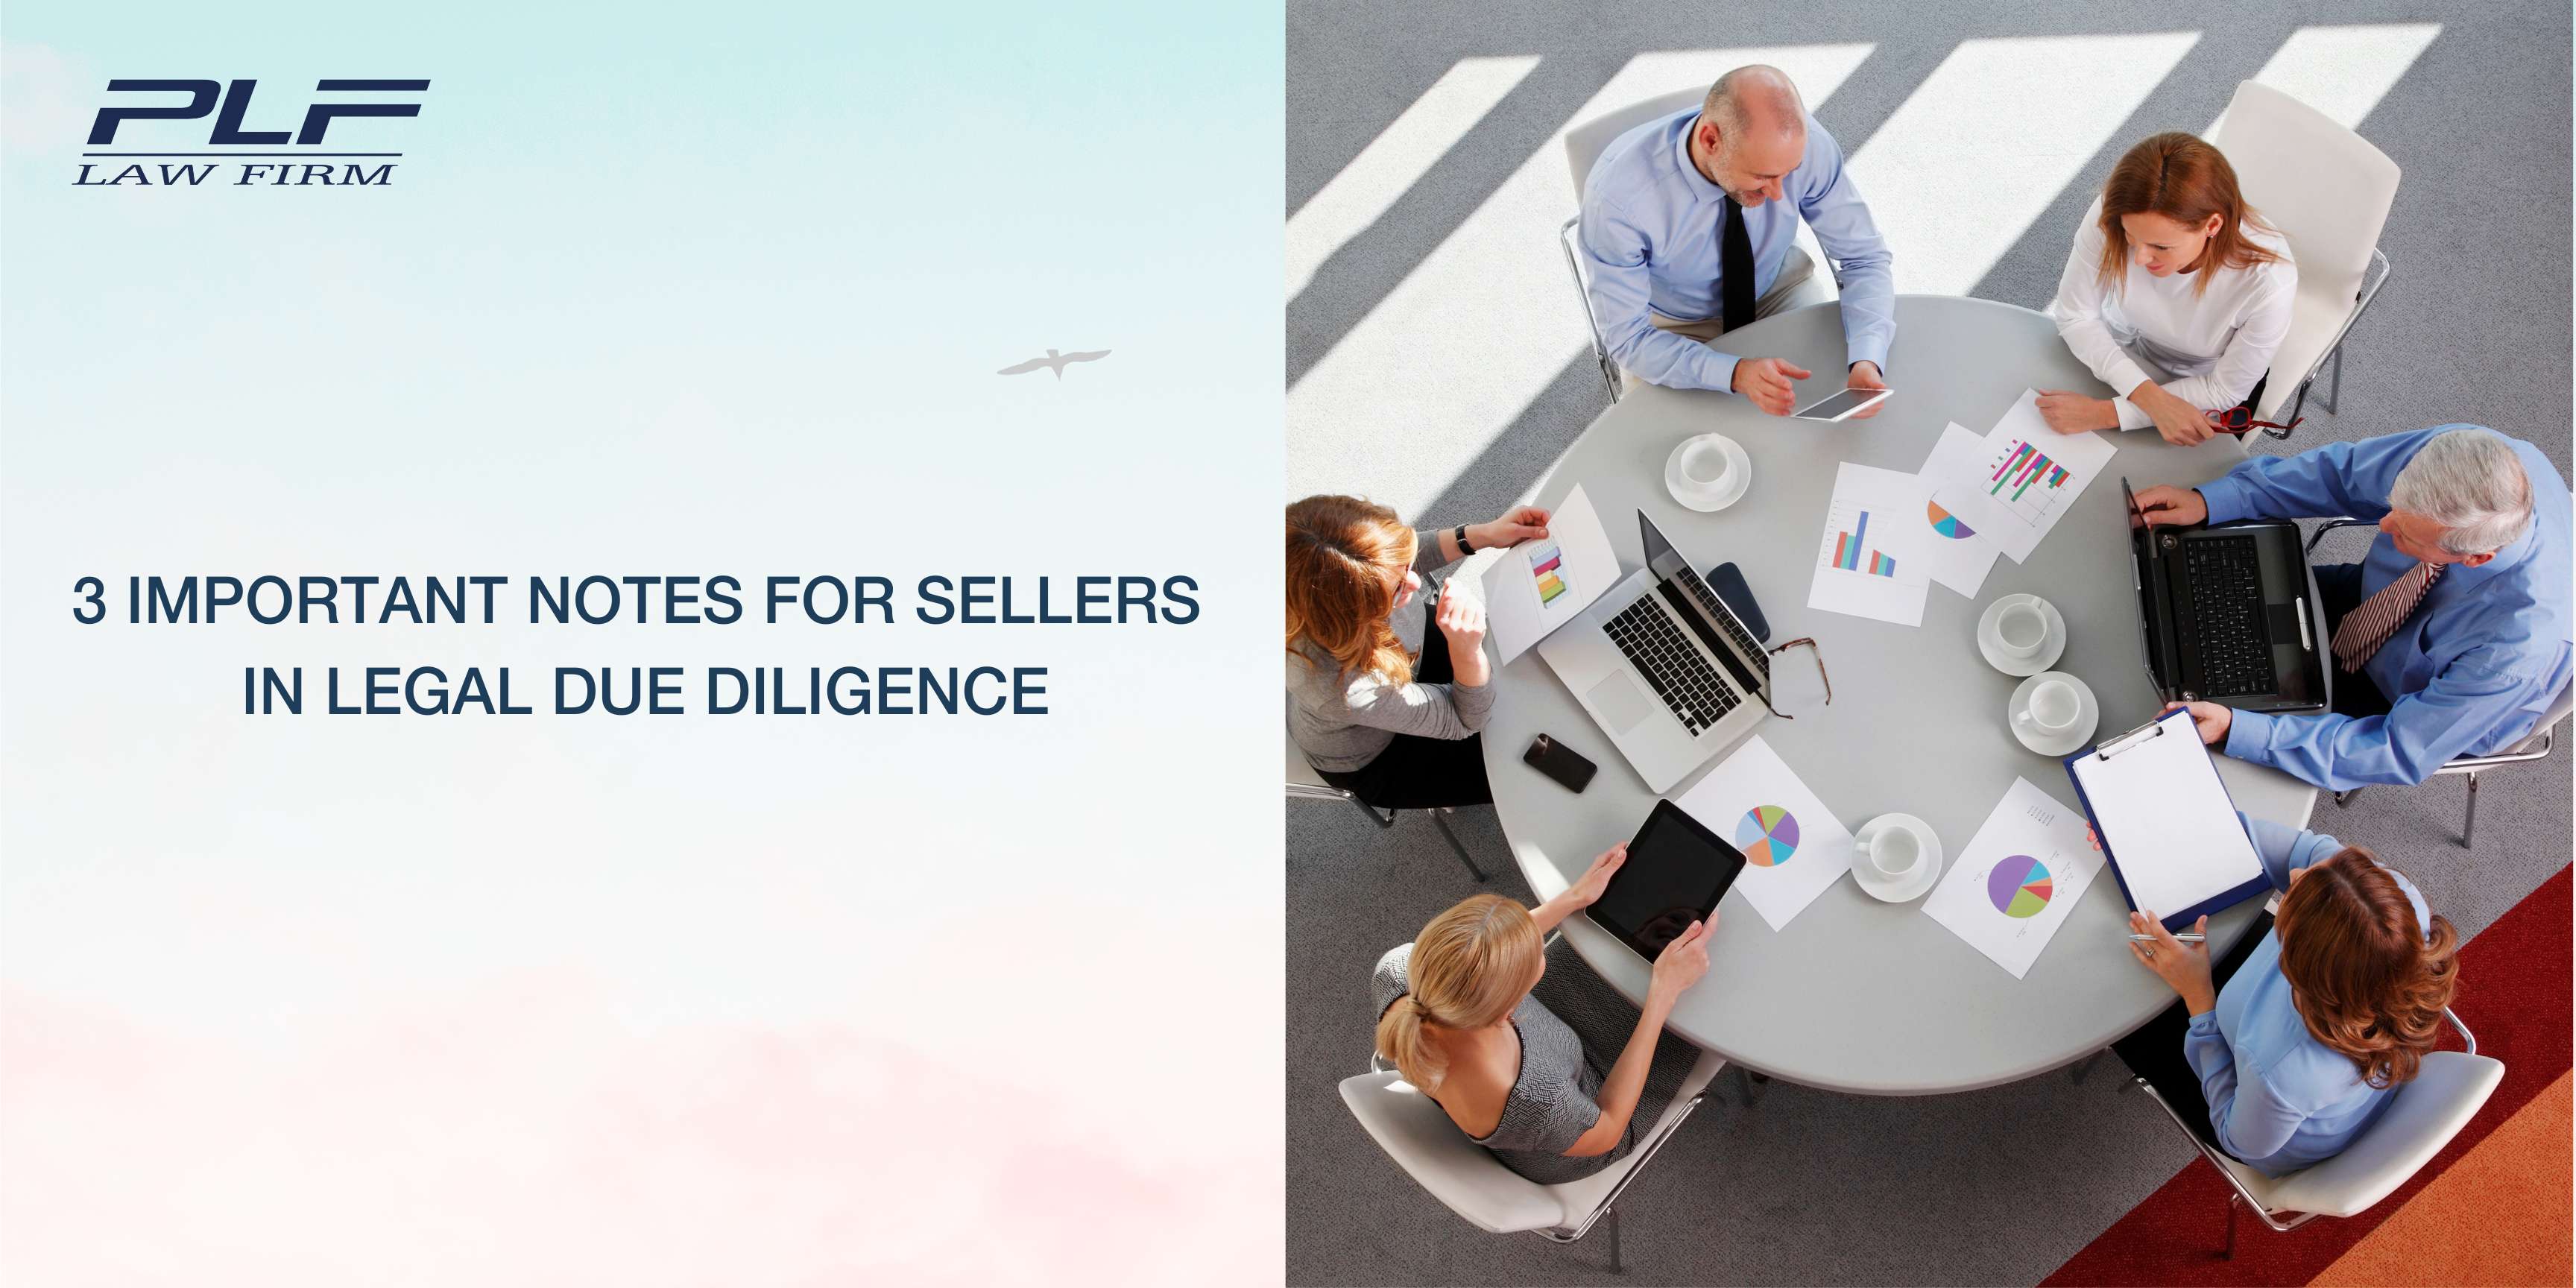 3 Important Notes For Sellers In Legal Due Diligence